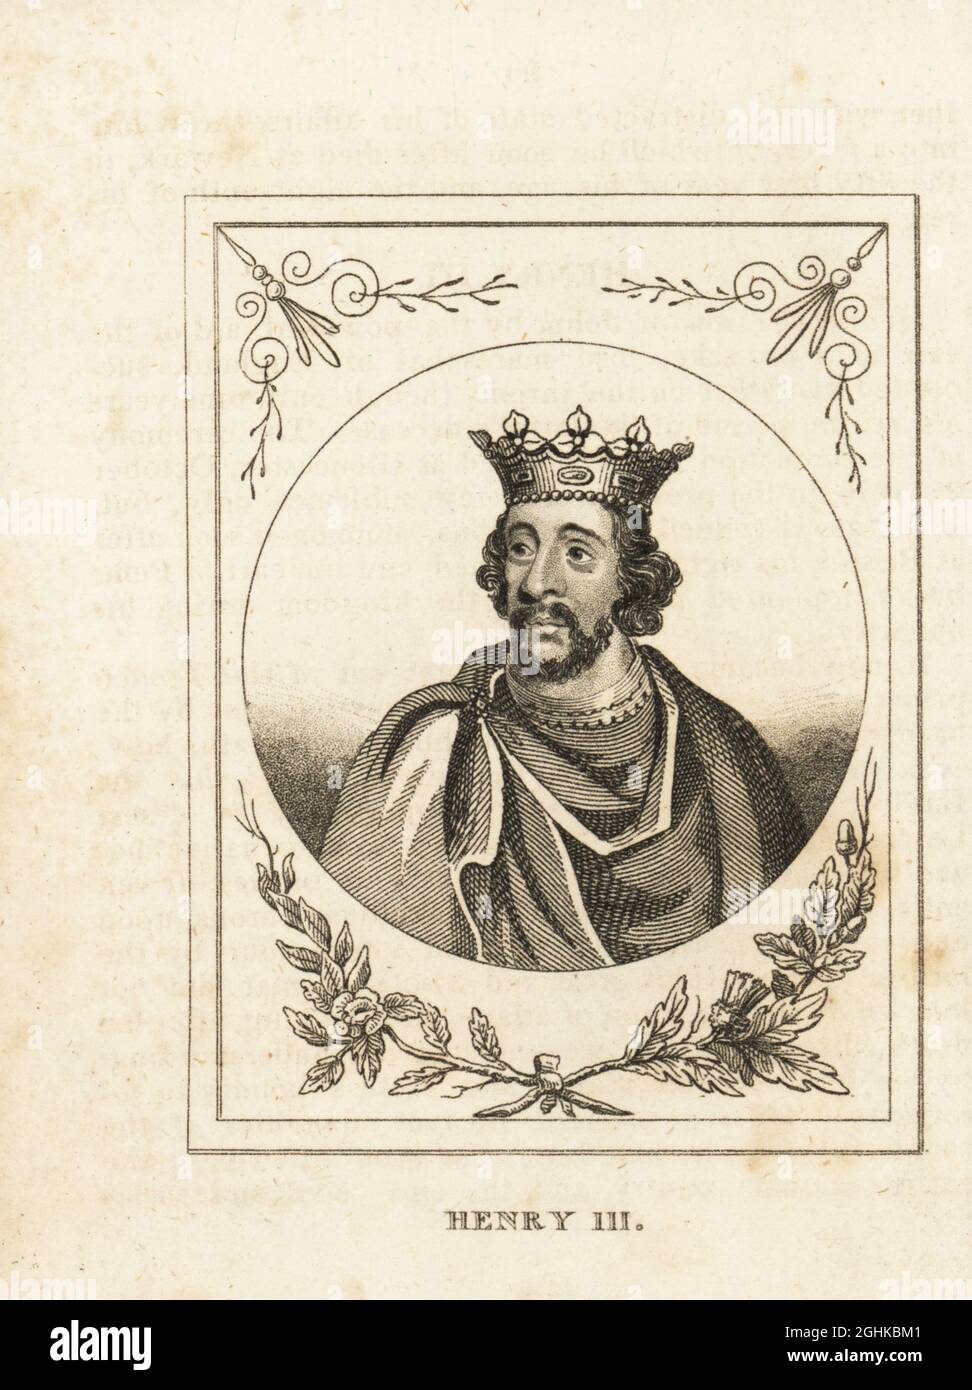 Portrait of King Henry III of England, Henry of Winchester, in crown, cape and brooch, 1207-1272. Copperplate engraving from M. A. Jones’ History of England from Julius Caesar to George IV, G. Virtue, 26 Ivy Lane, London, 1836. Stock Photo